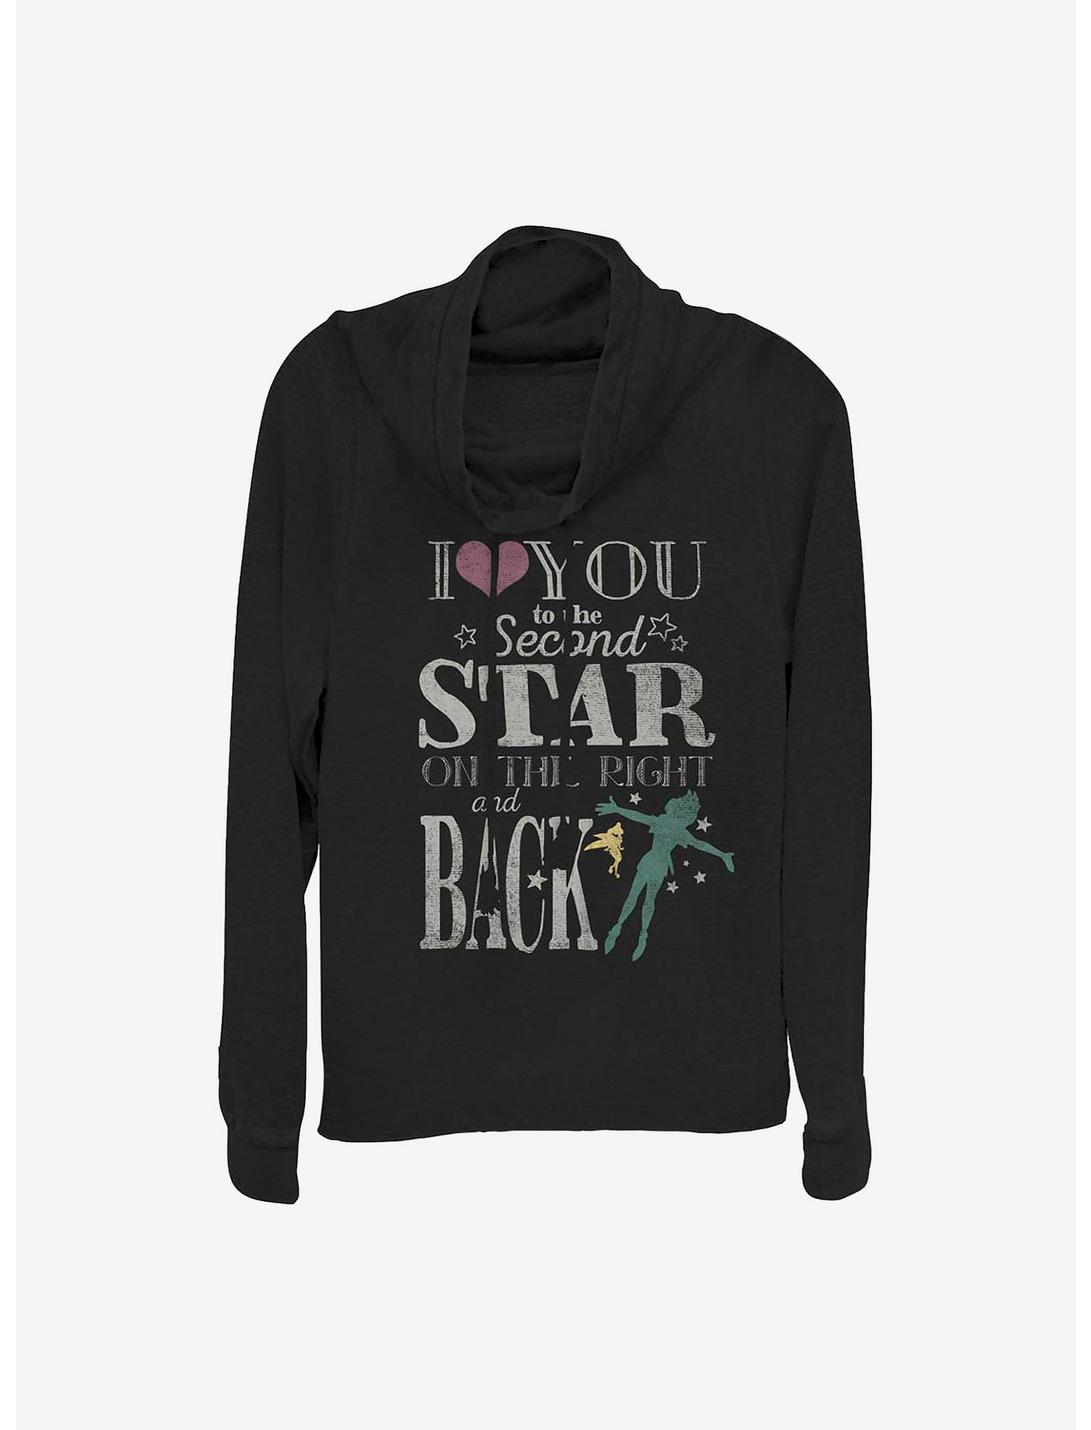 Disney Peter Pan Love You To The Second Star Cowlneck Long-Sleeve Girls Top, BLACK, hi-res